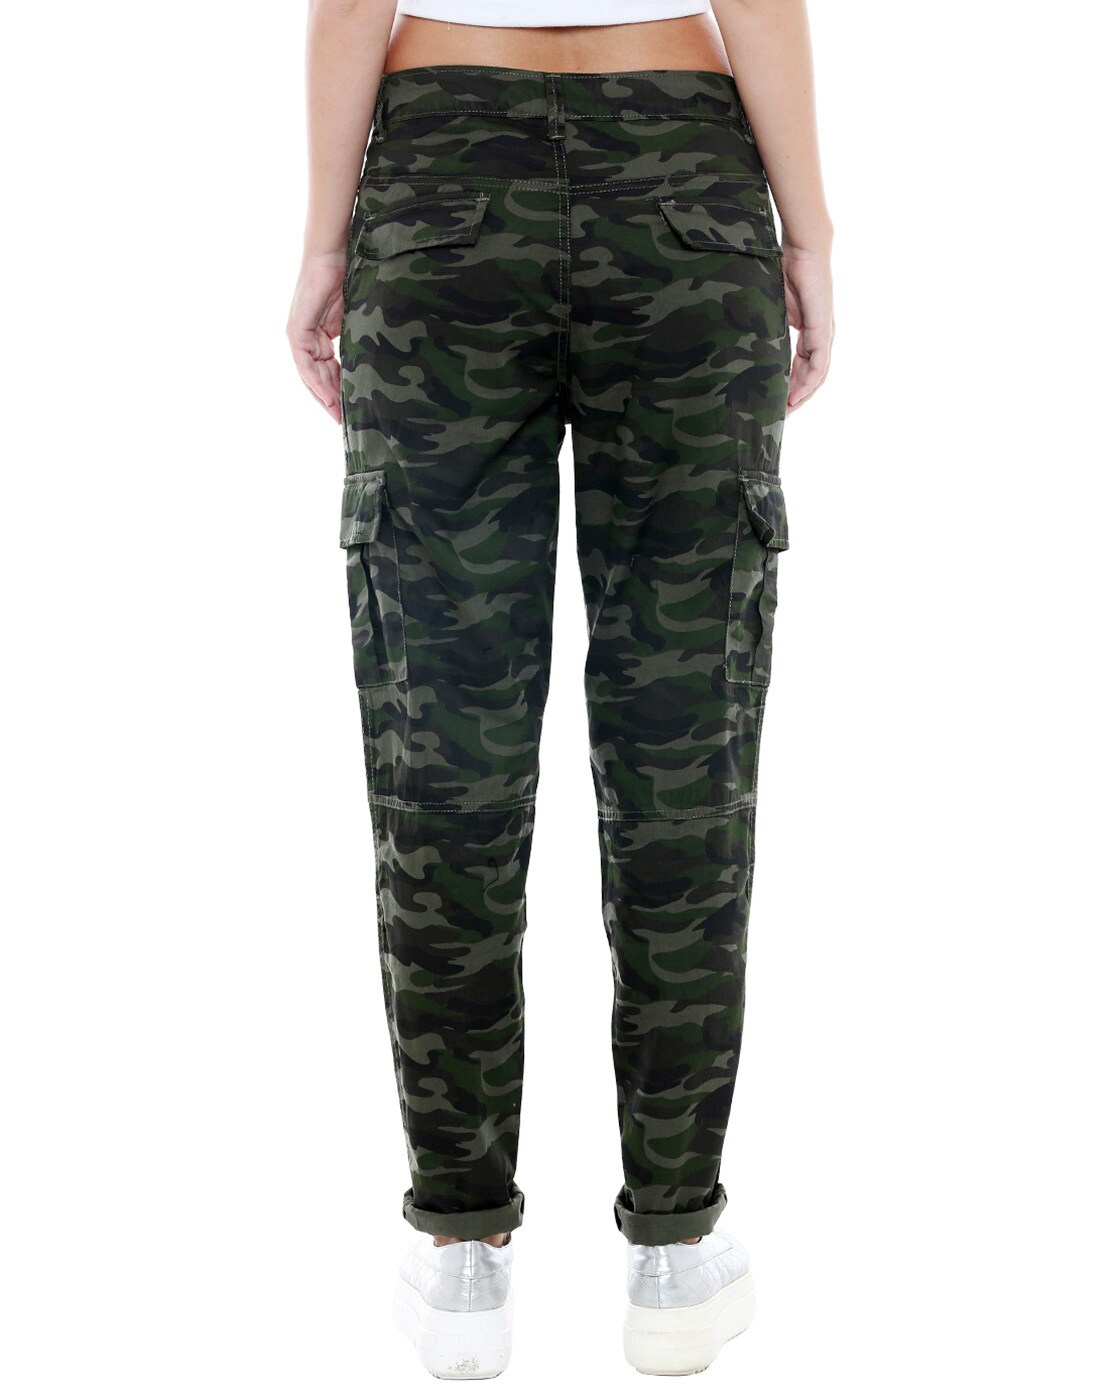 Camo Baggy Cargo Jeans with Detachable Straps - SWS Store⎮